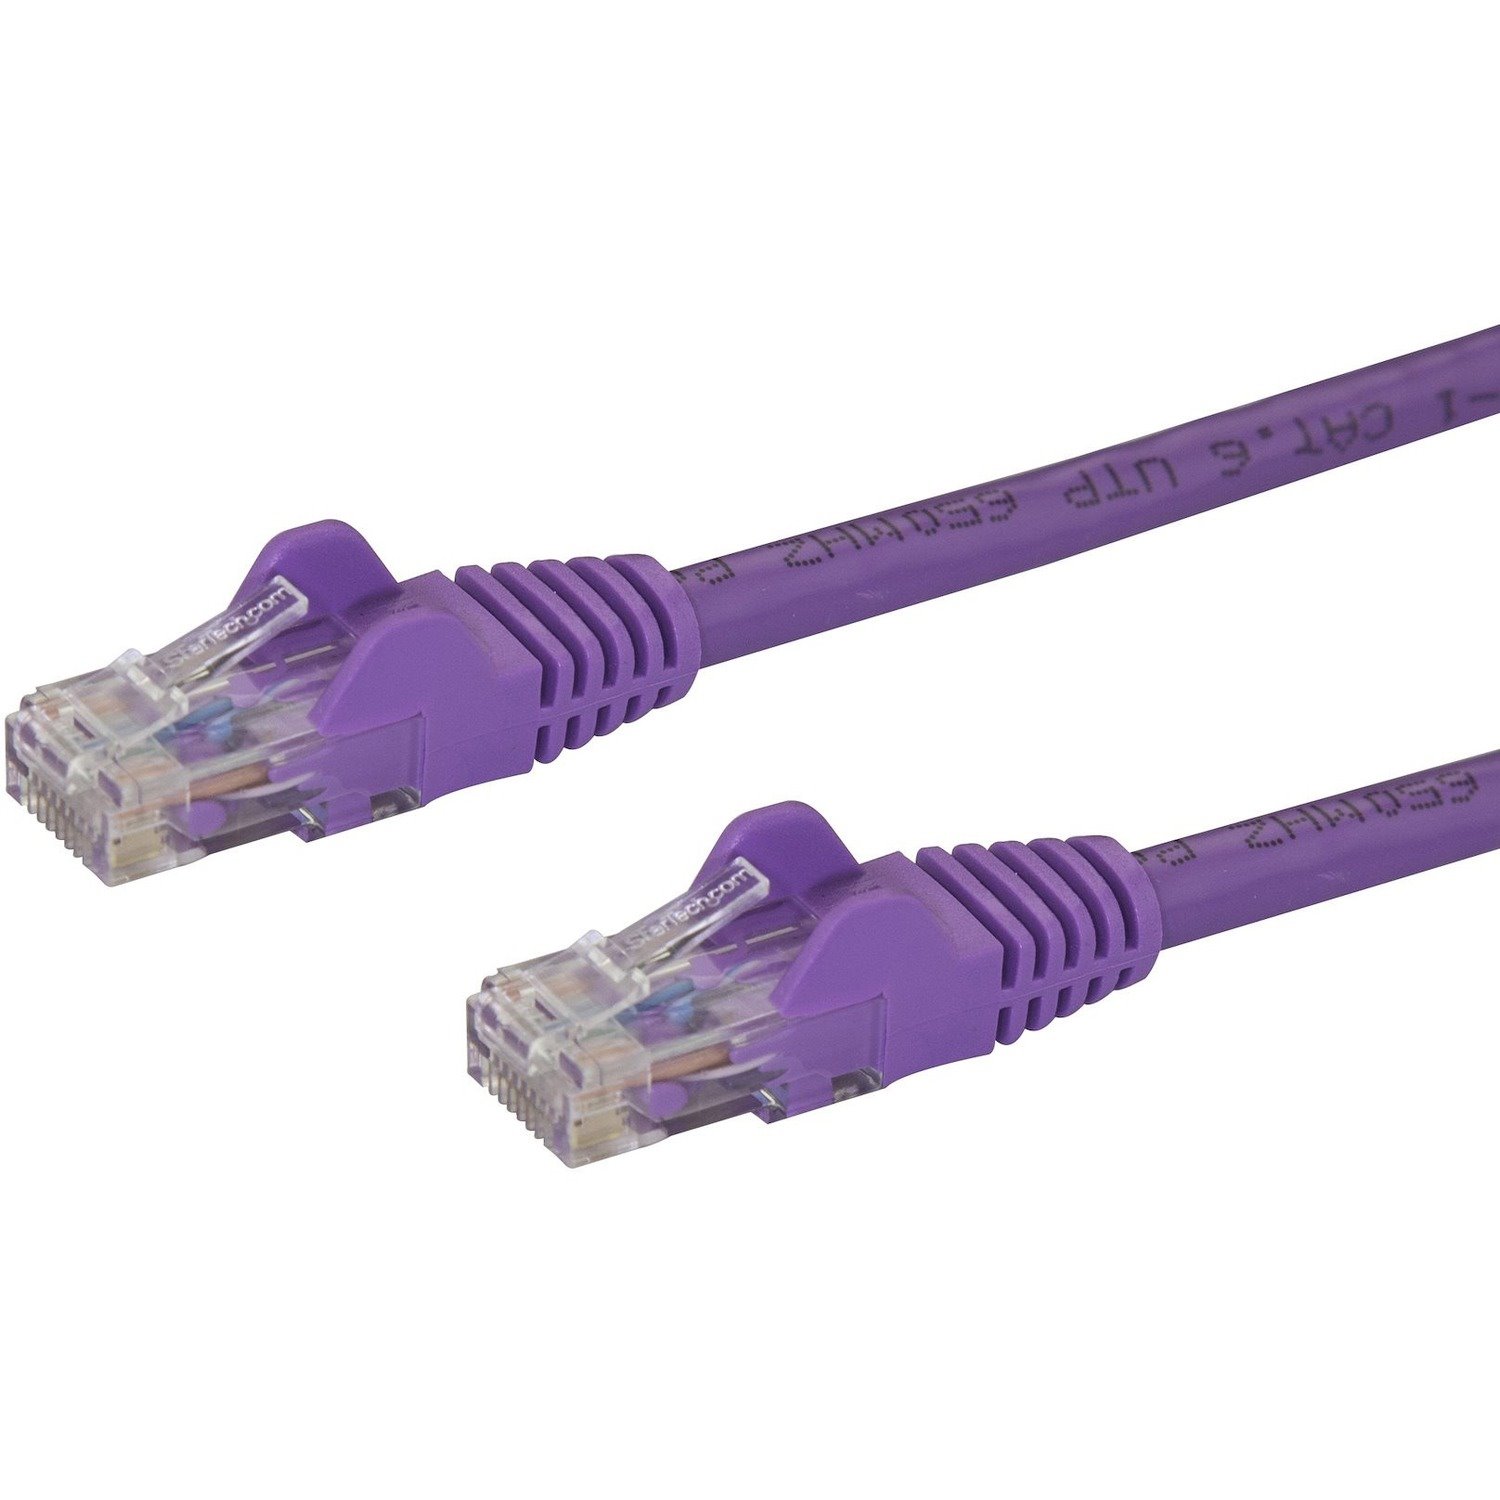 StarTech.com 5 m Category 6 Network Cable for Network Device, Distribution Panel, Workstation, Wall Outlet, VoIP Device, Security Device, Hub - 1